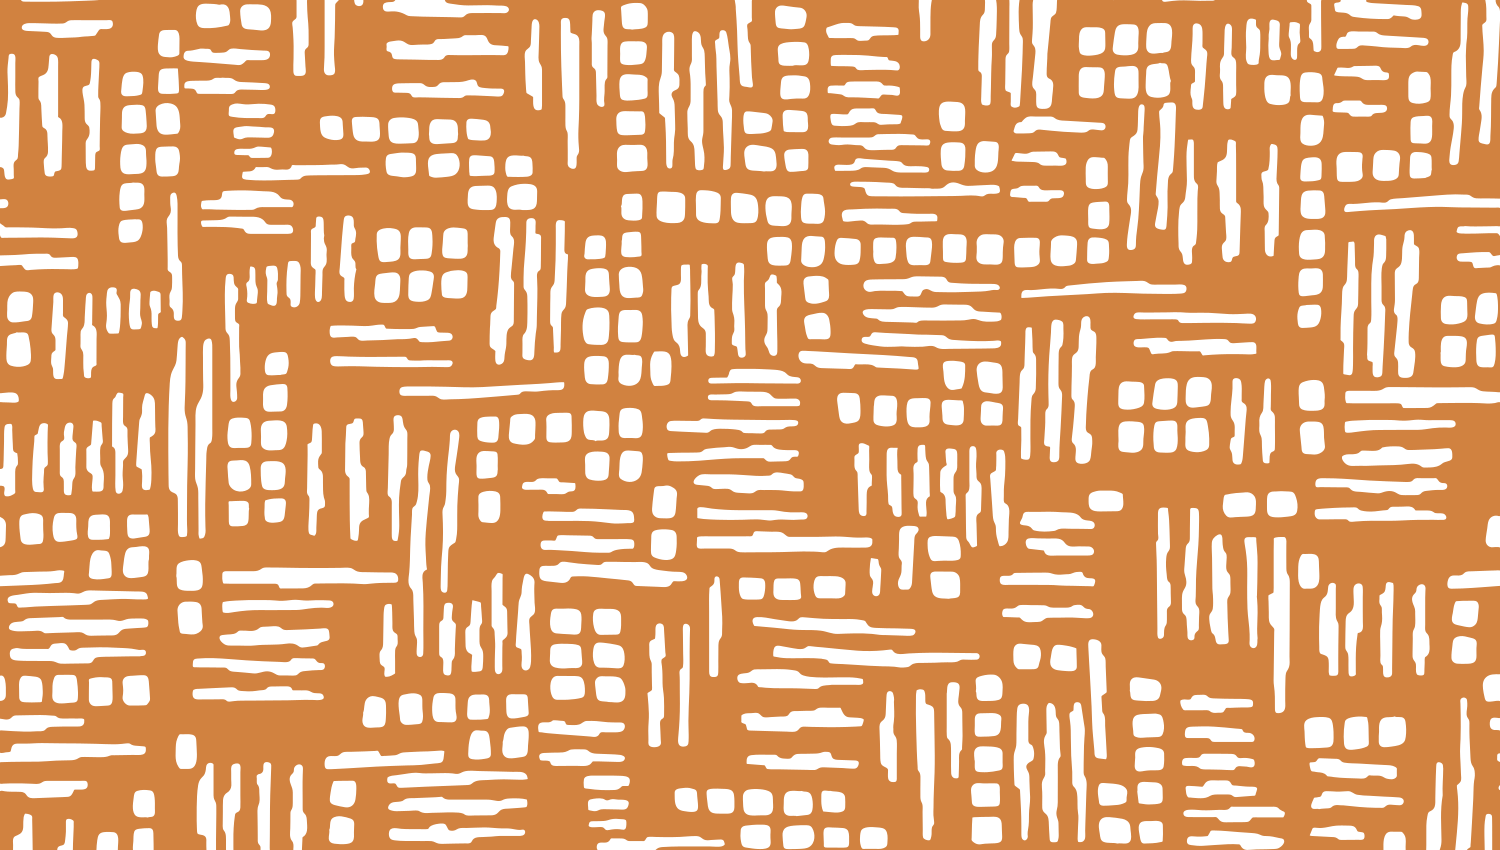 Parasoleil™ Krung Thep© pattern displayed with a ochre color overlay